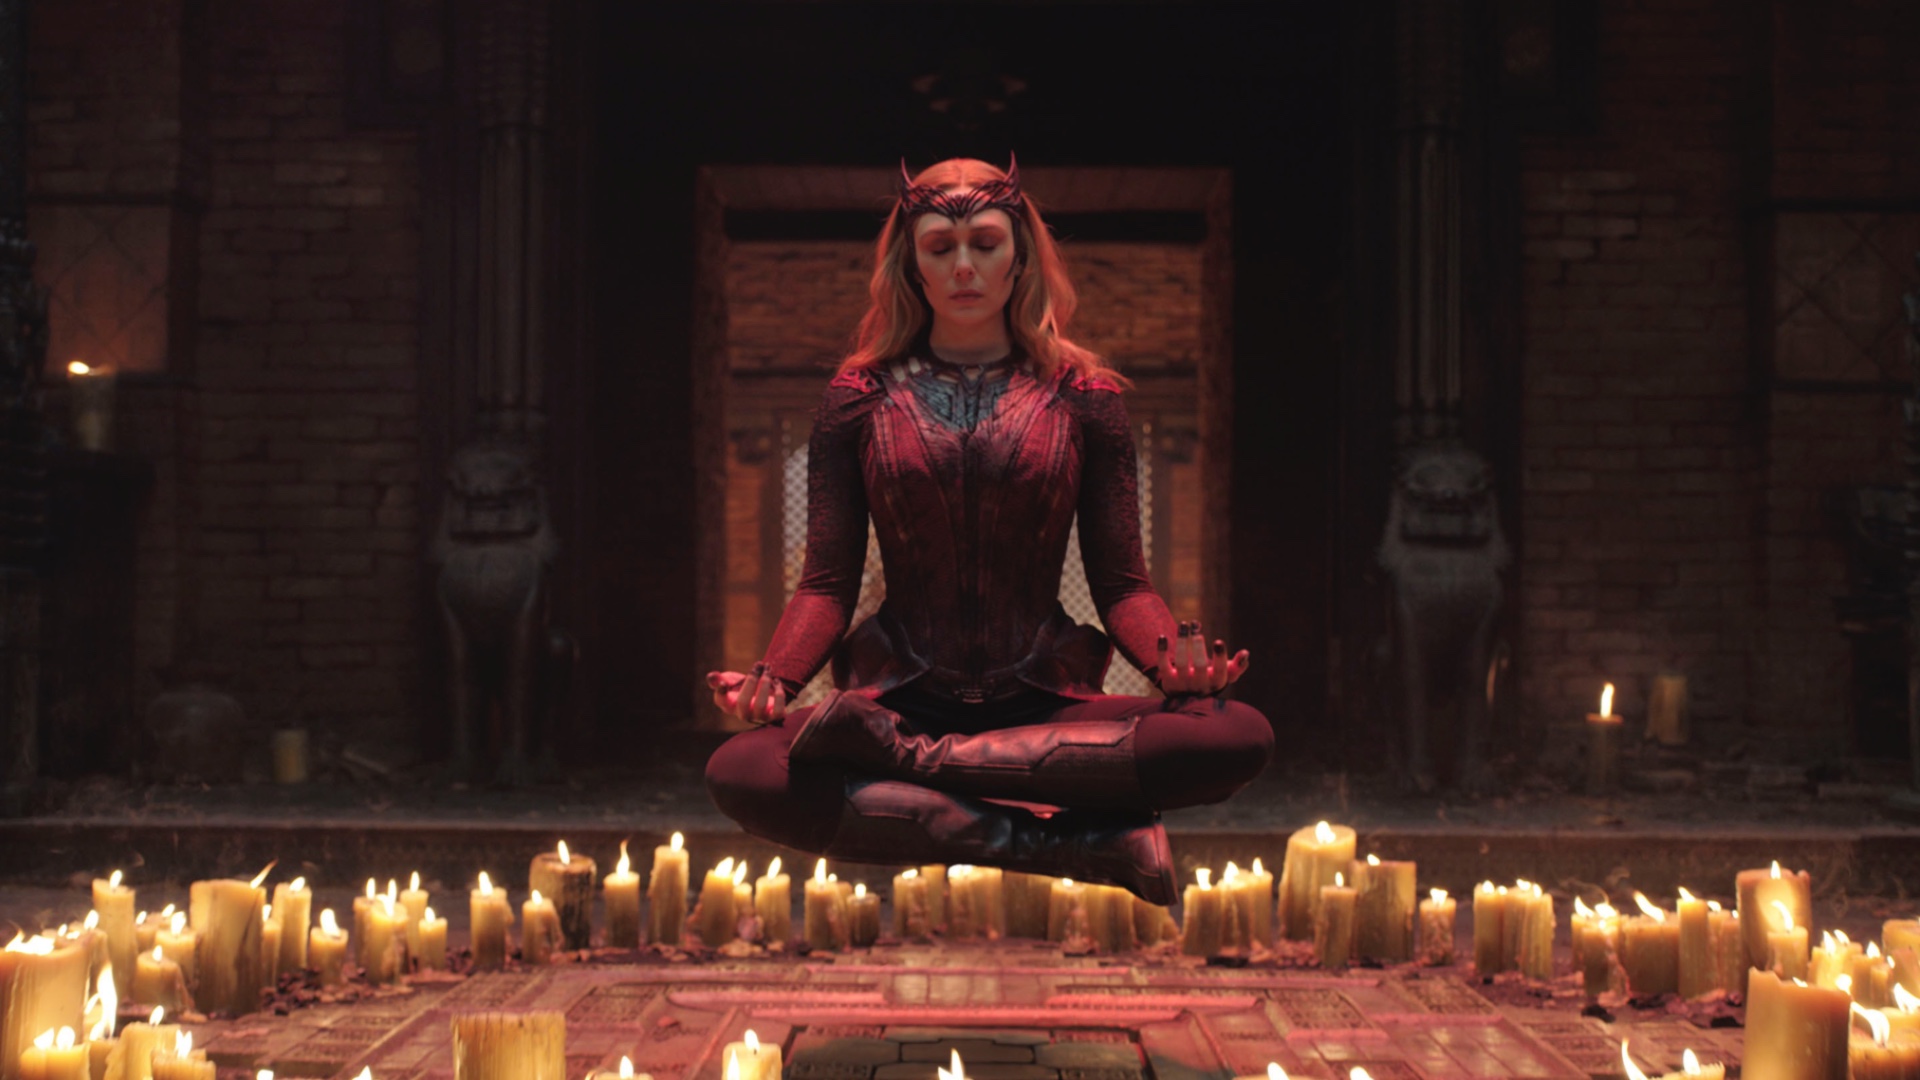 Wanda Maximoff - The Scarlet Witch